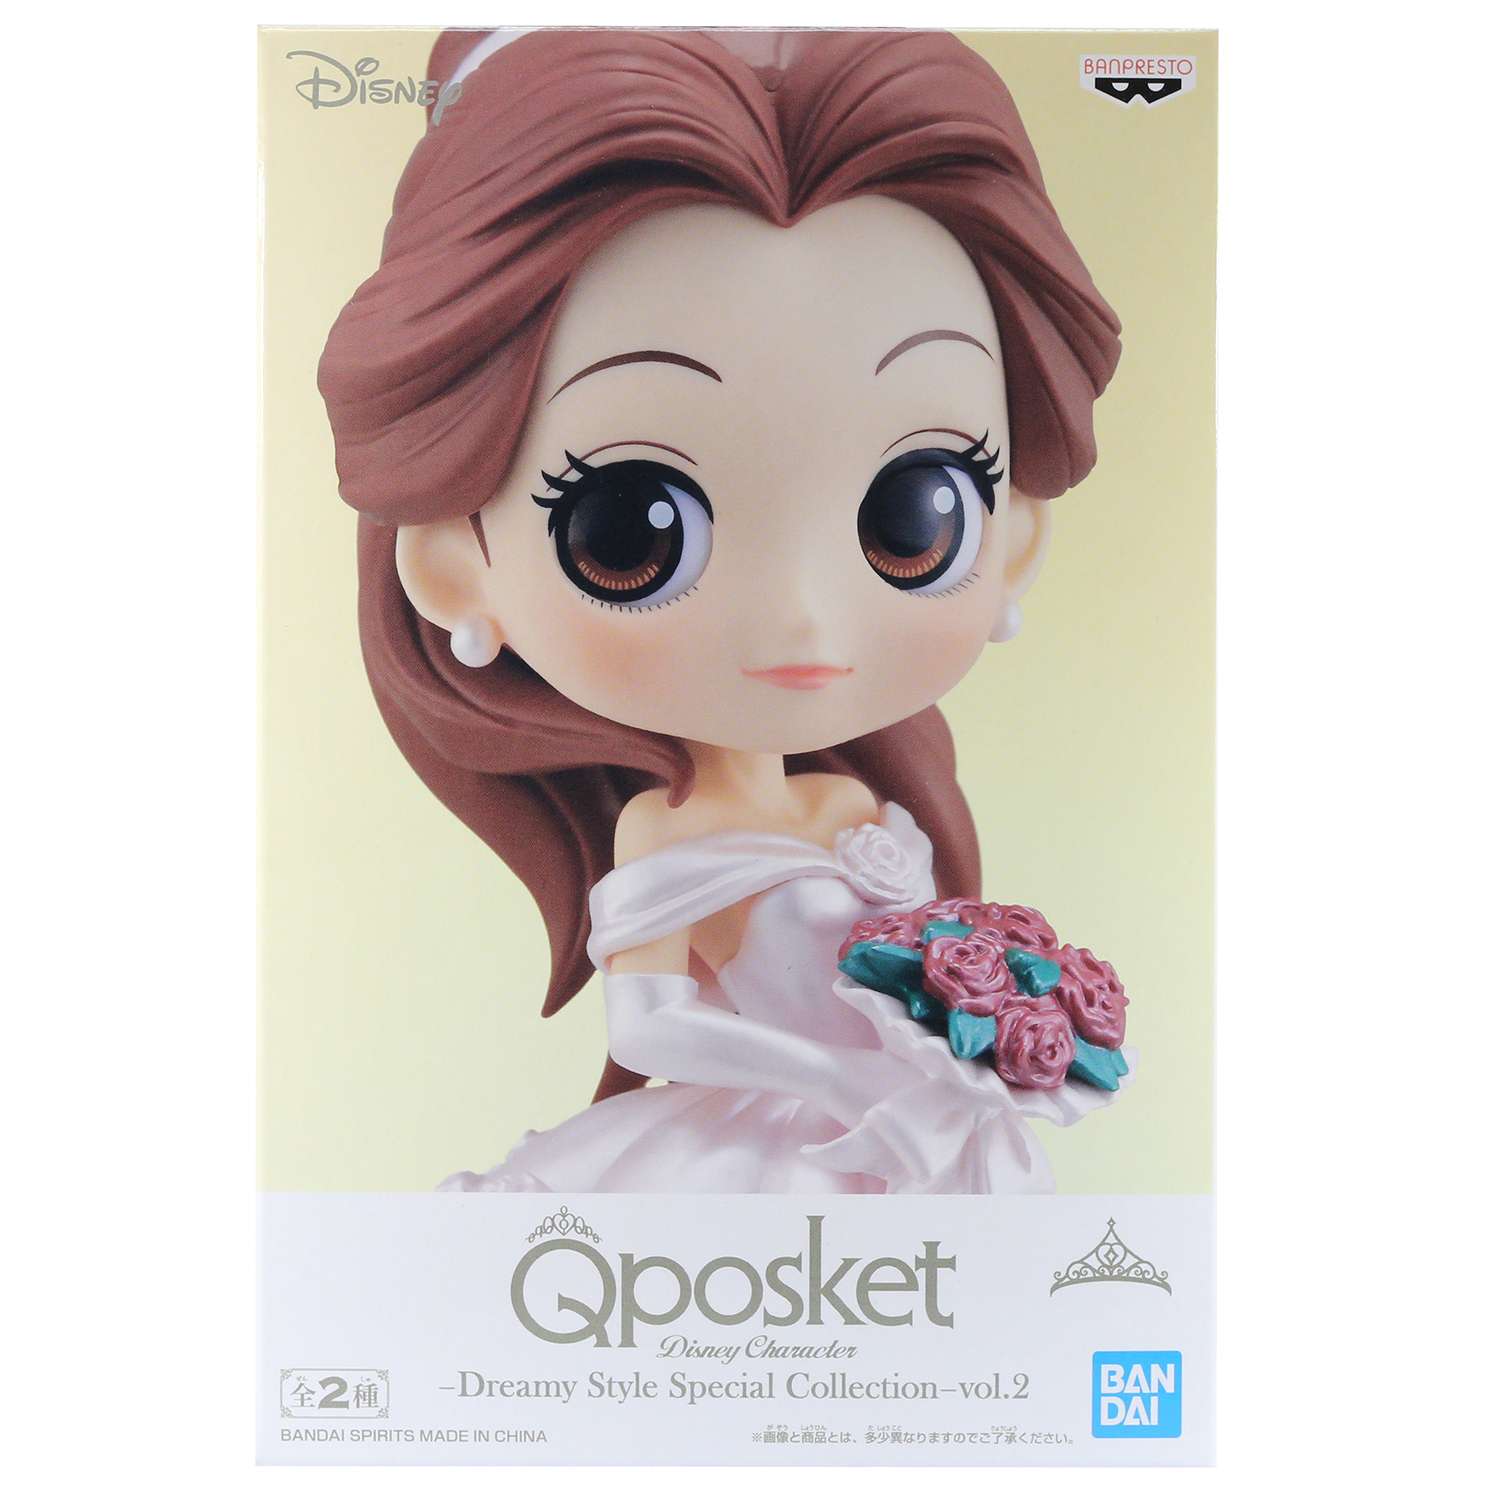 Фигурка Qposket Disney Character Dreamy Style Special Collection: Belle 16150P - фото 2